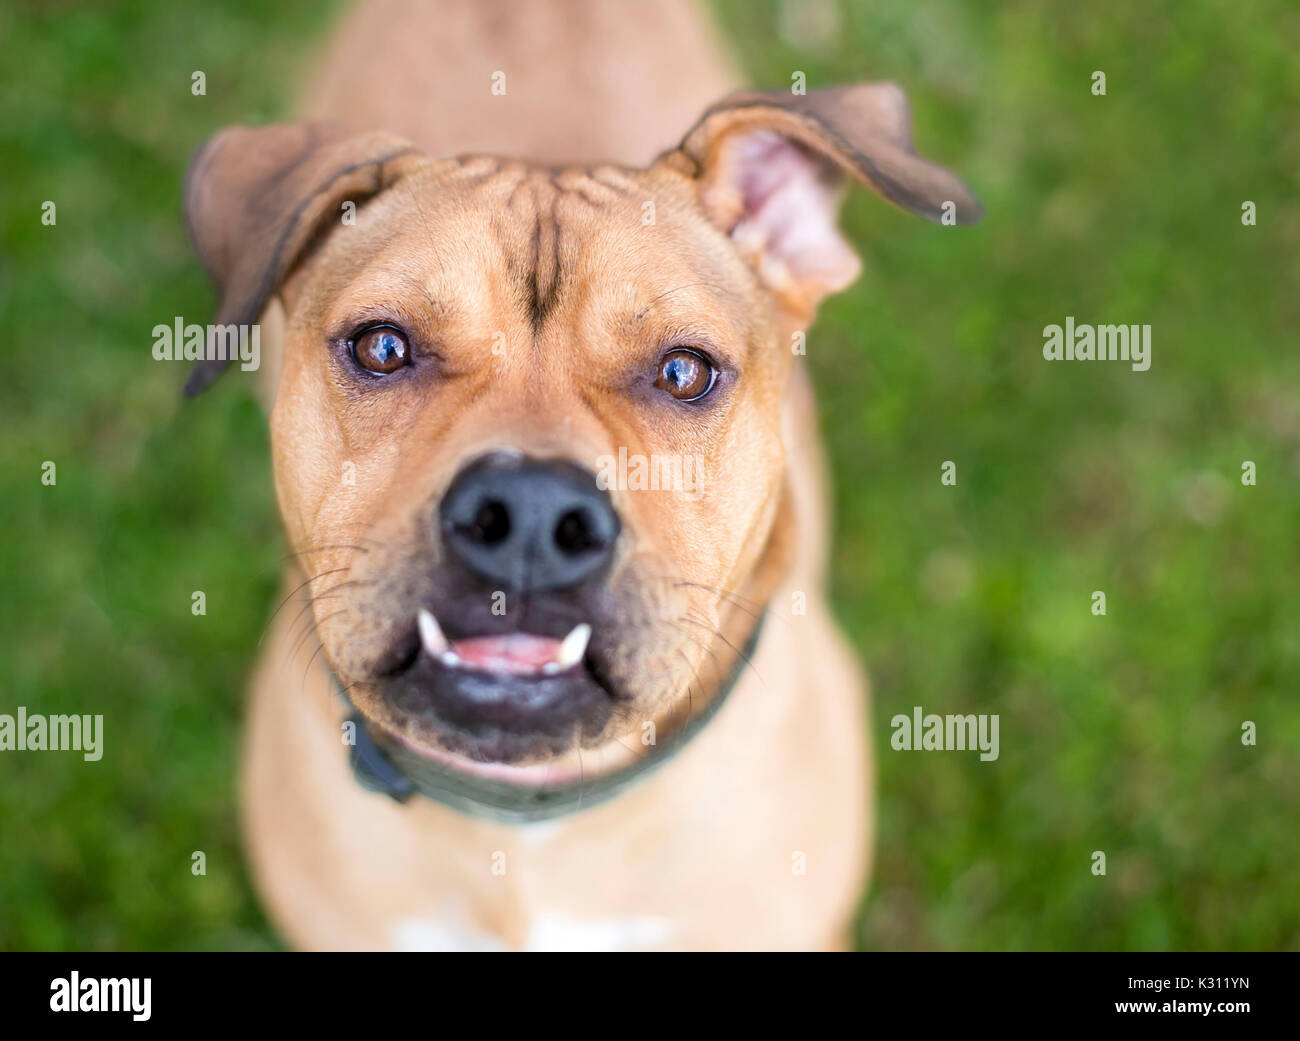 Mixed breed dog with an underbite Stock Photo